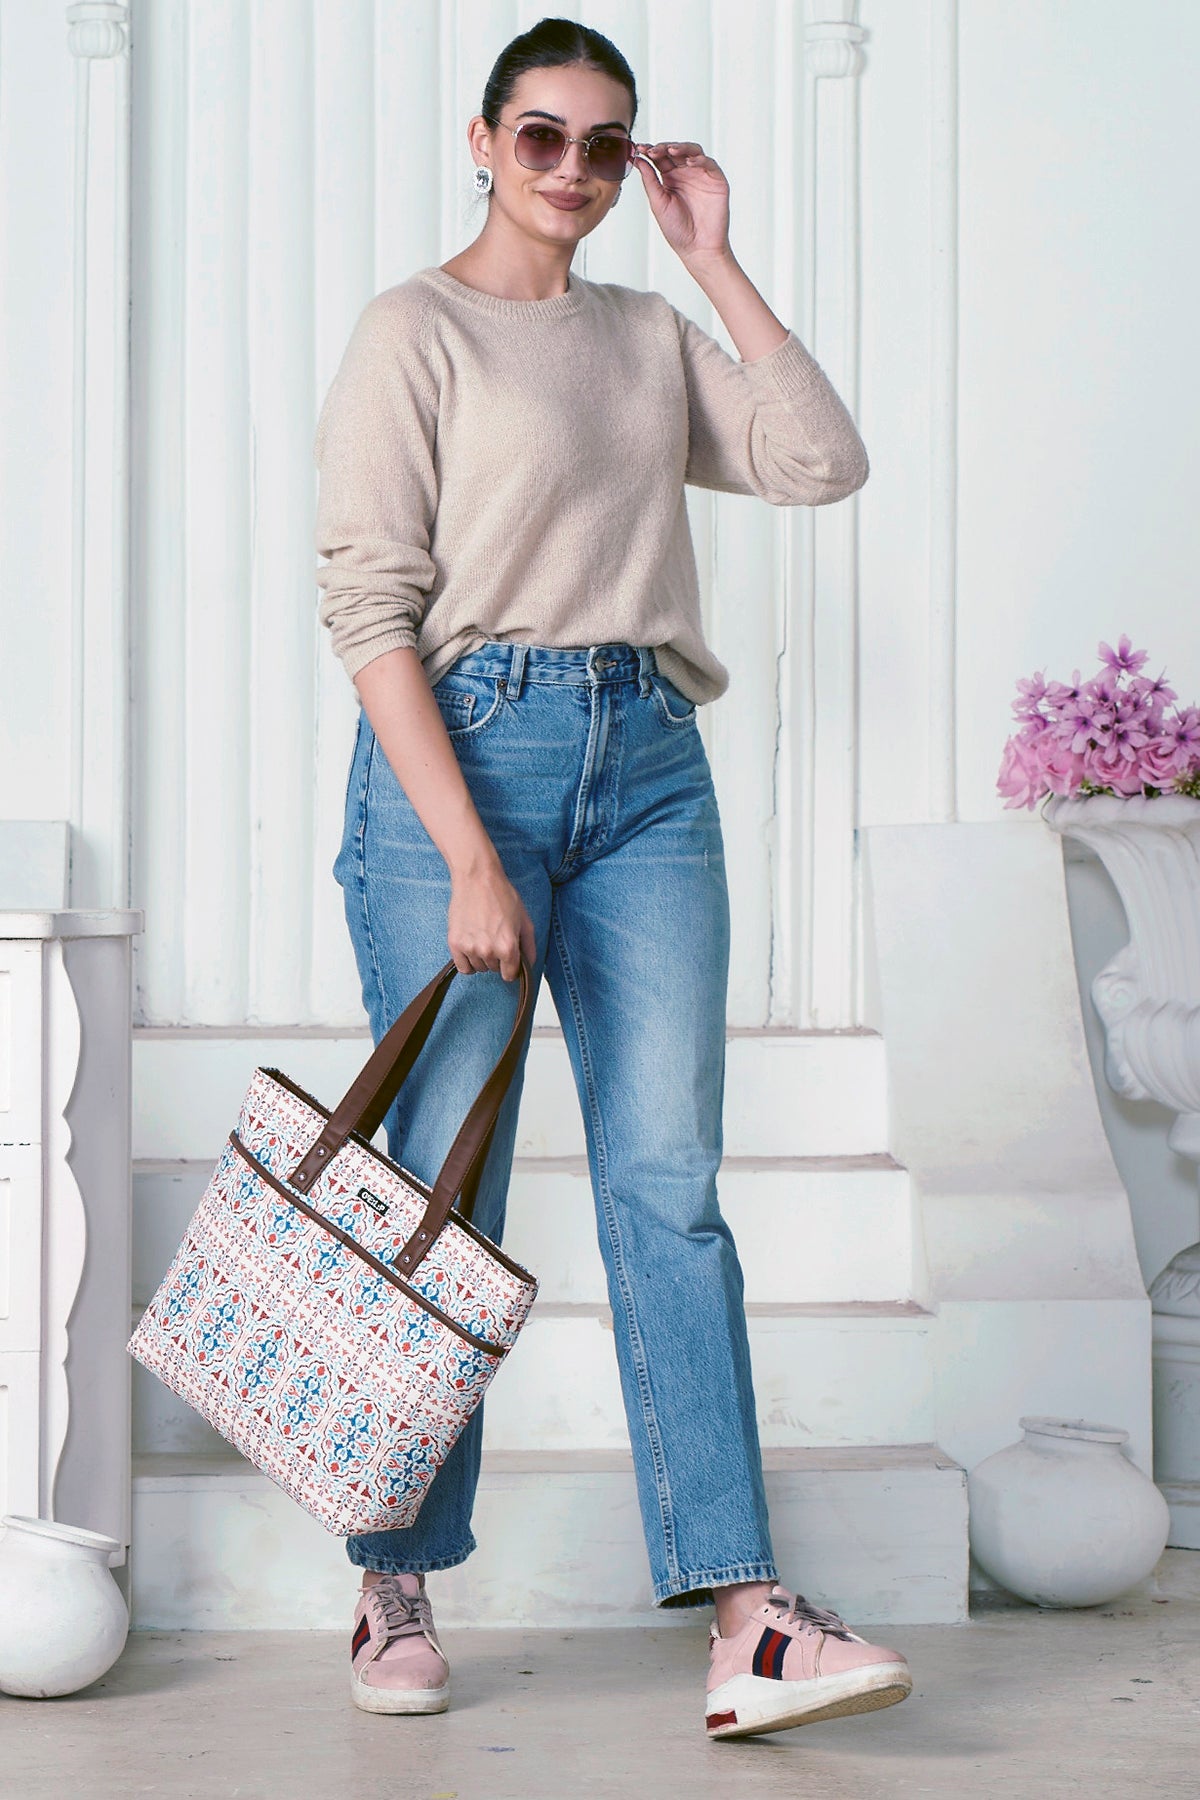 OT 003: Statement in Style - Printed Canvas Tote for Fashionable Functionality